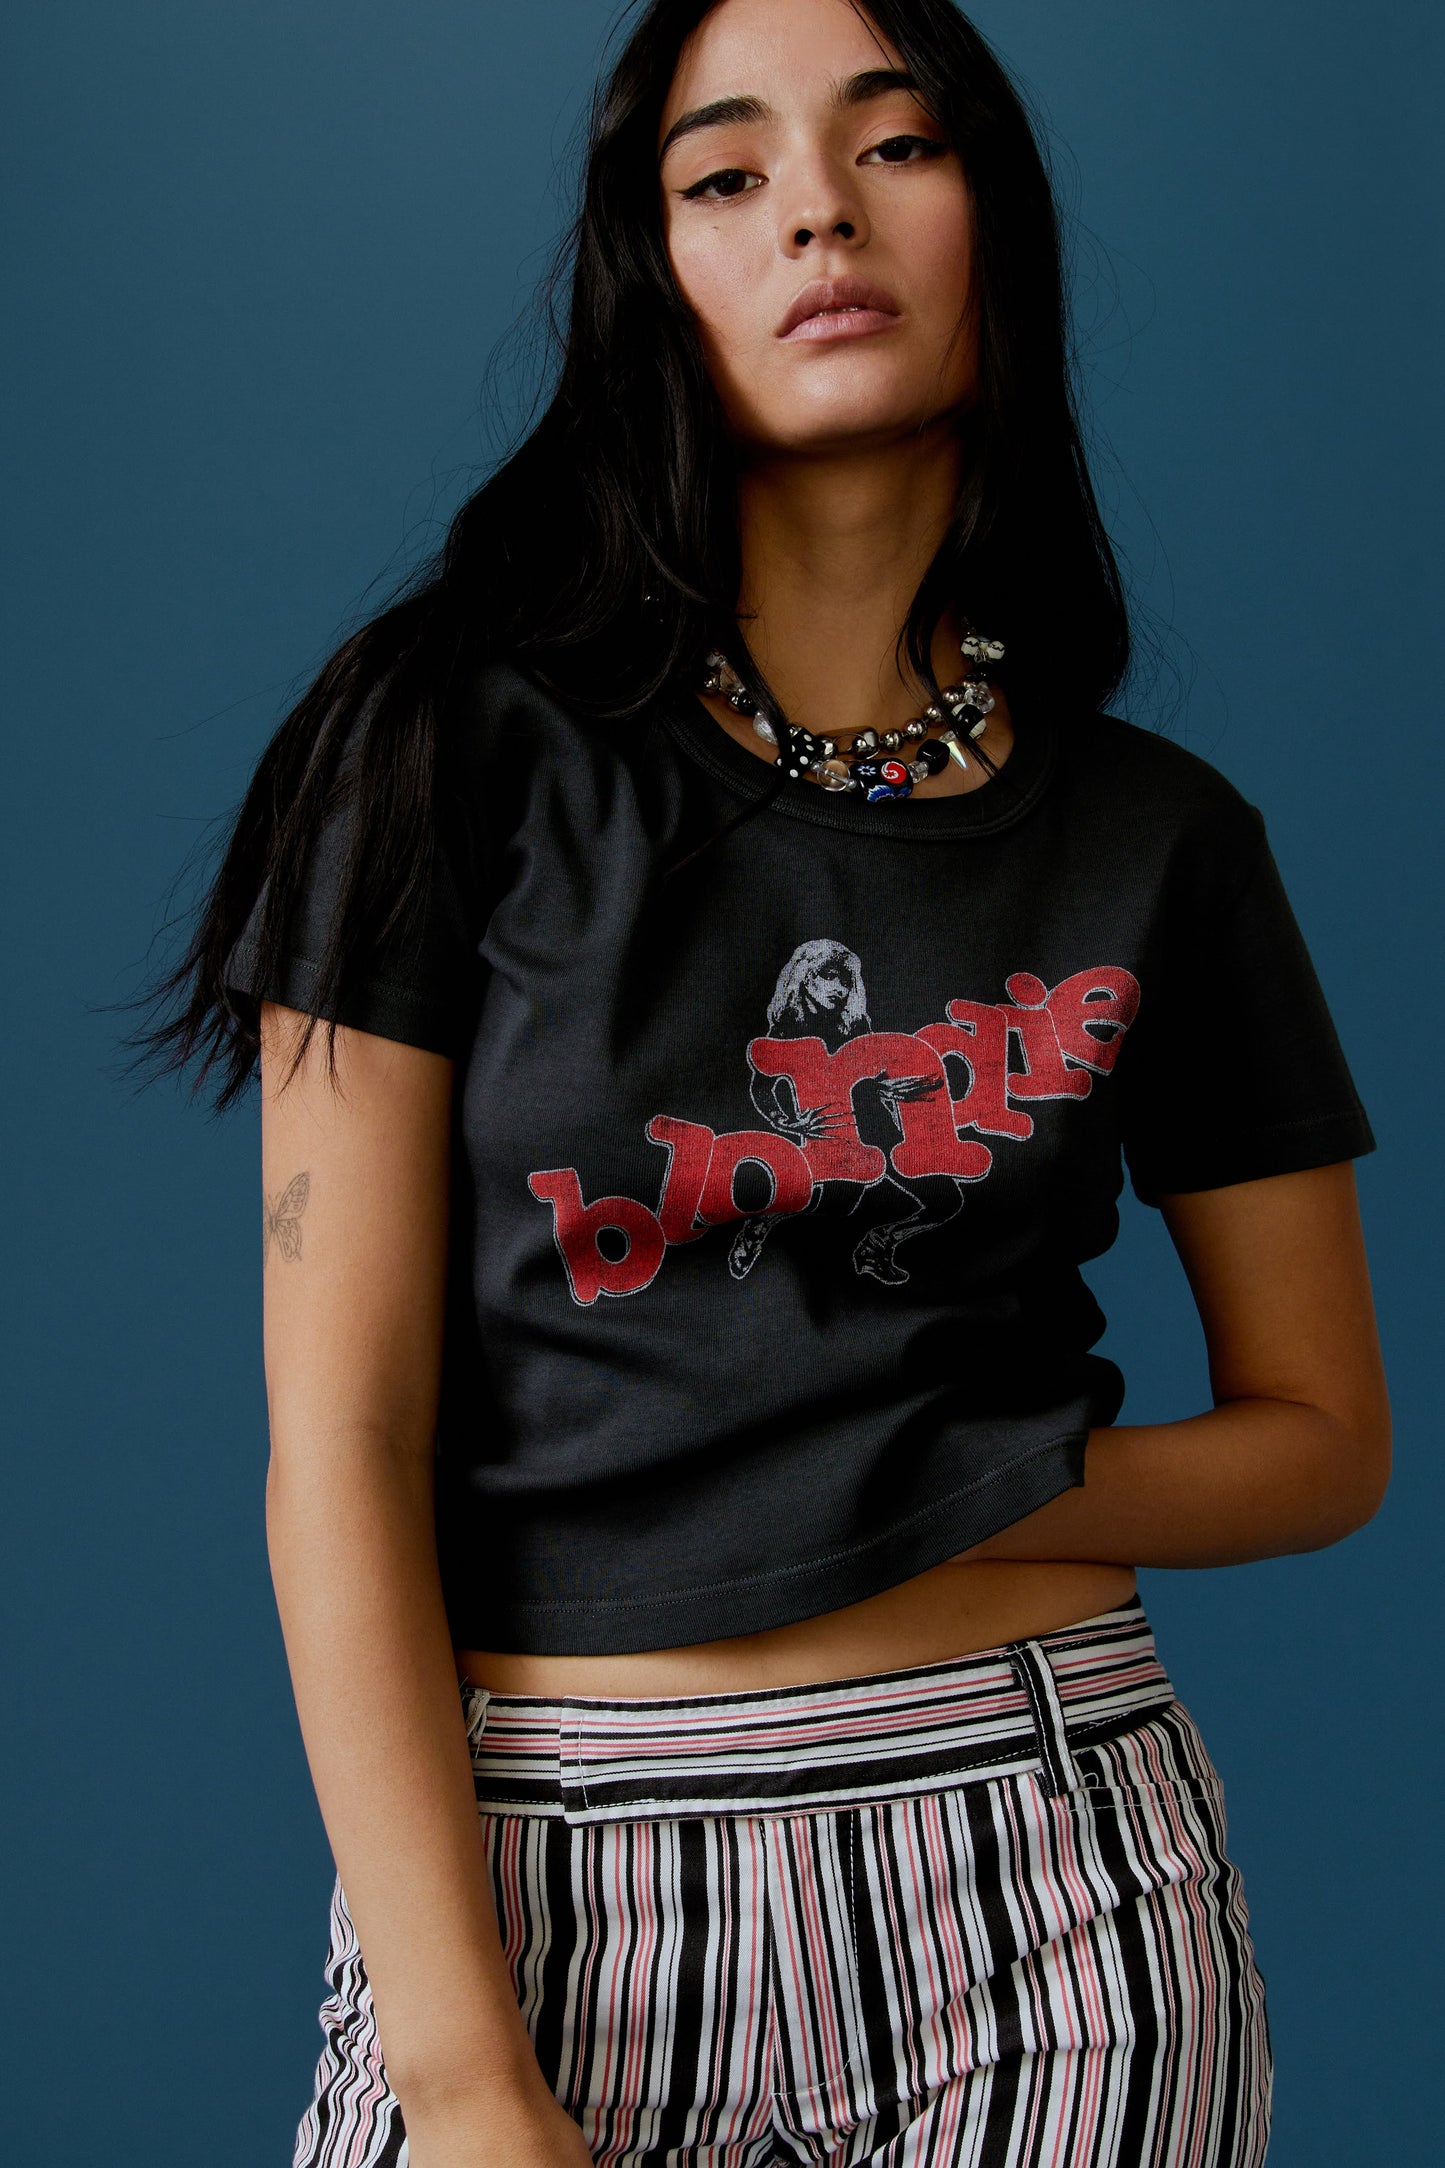 A dark-haired model featuring a black tee stamped with 'blondie' in red, scattered letters.